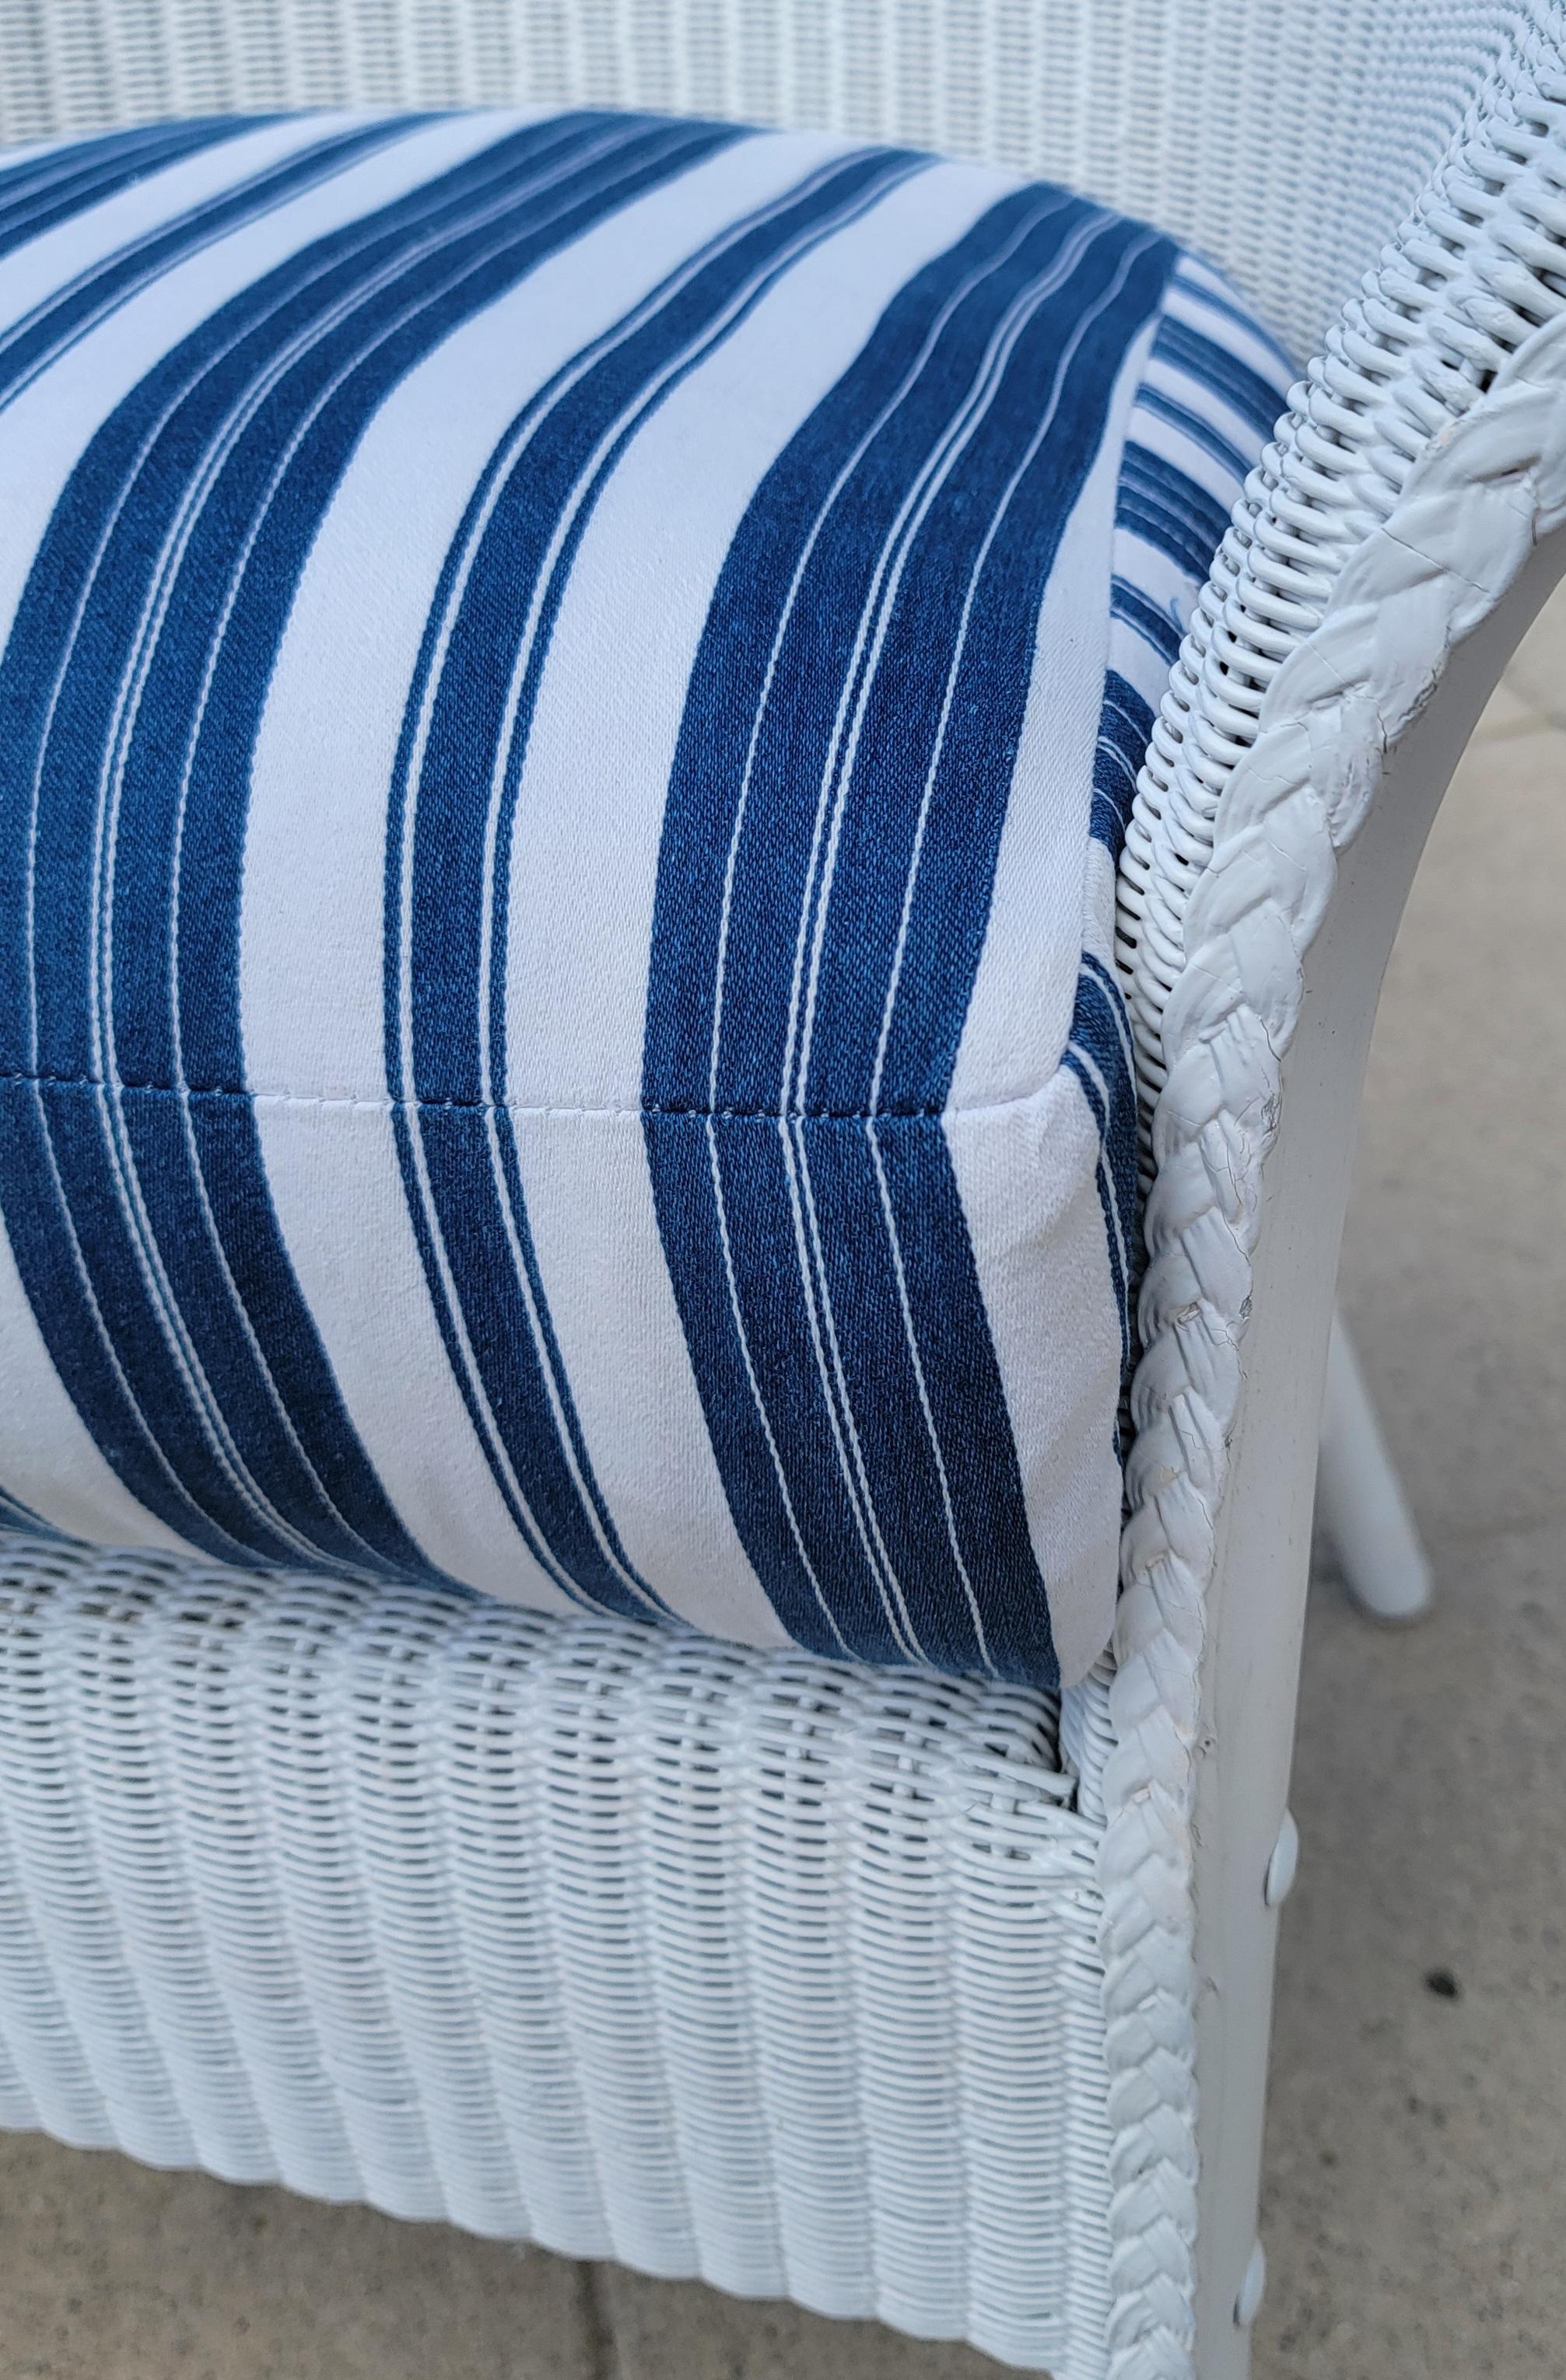 blue and white wicker chairs